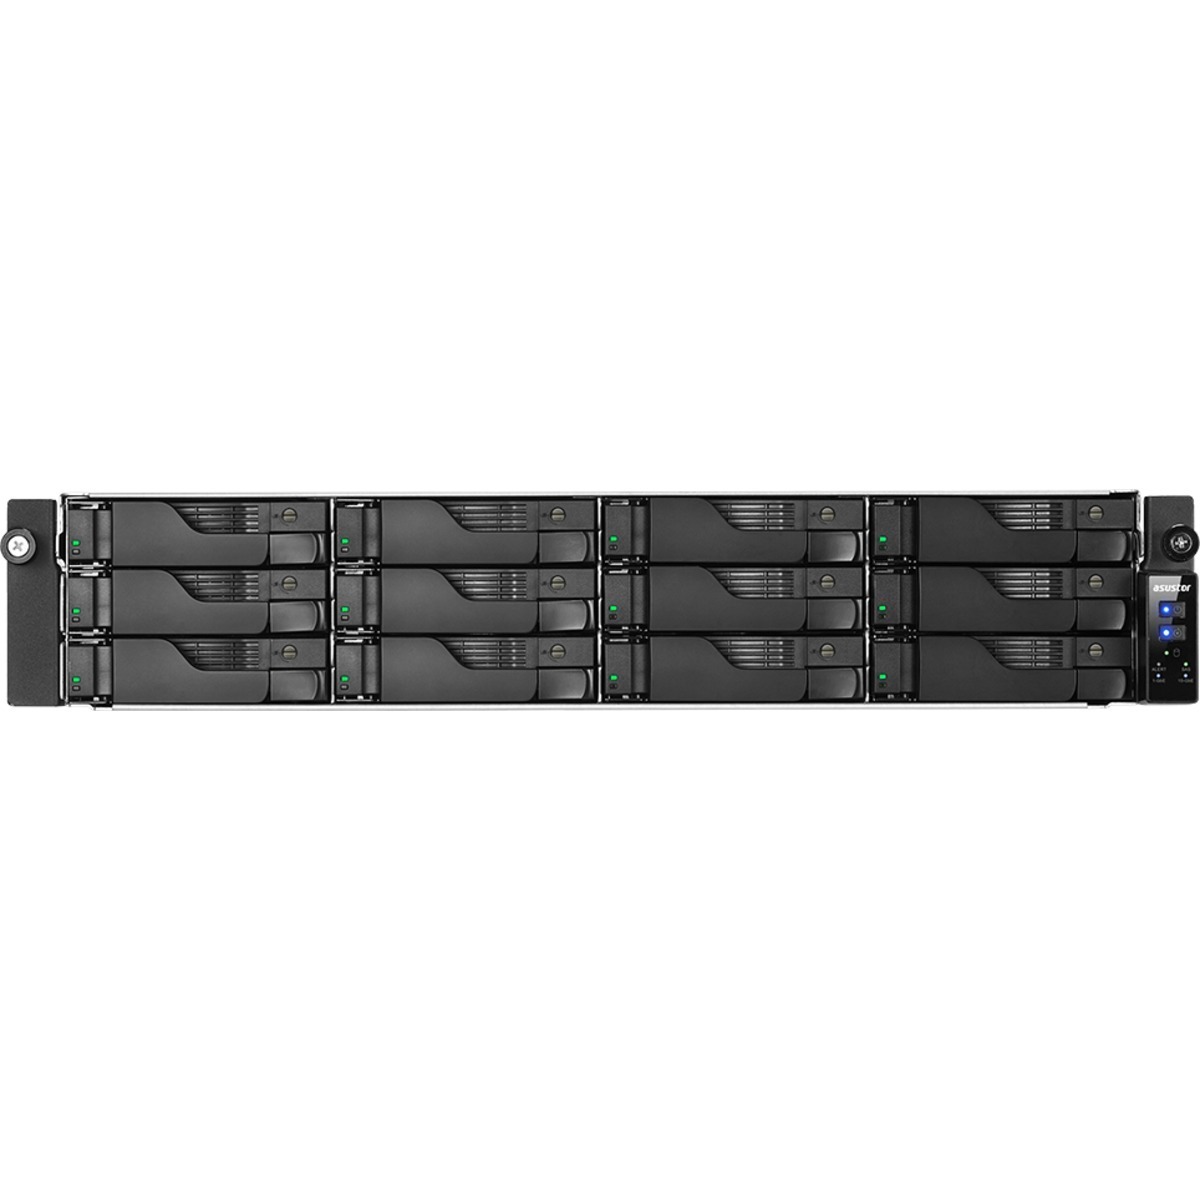 ASUSTOR AS7112RDX Lockerstor 12R Pro 48tb 12-Bay RackMount Large Business / Enterprise NAS - Network Attached Storage Device 8x6tb Seagate IronWolf ST6000VN006 3.5 5400rpm SATA 6Gb/s HDD NAS Class Drives Installed - Burn-In Tested AS7112RDX Lockerstor 12R Pro